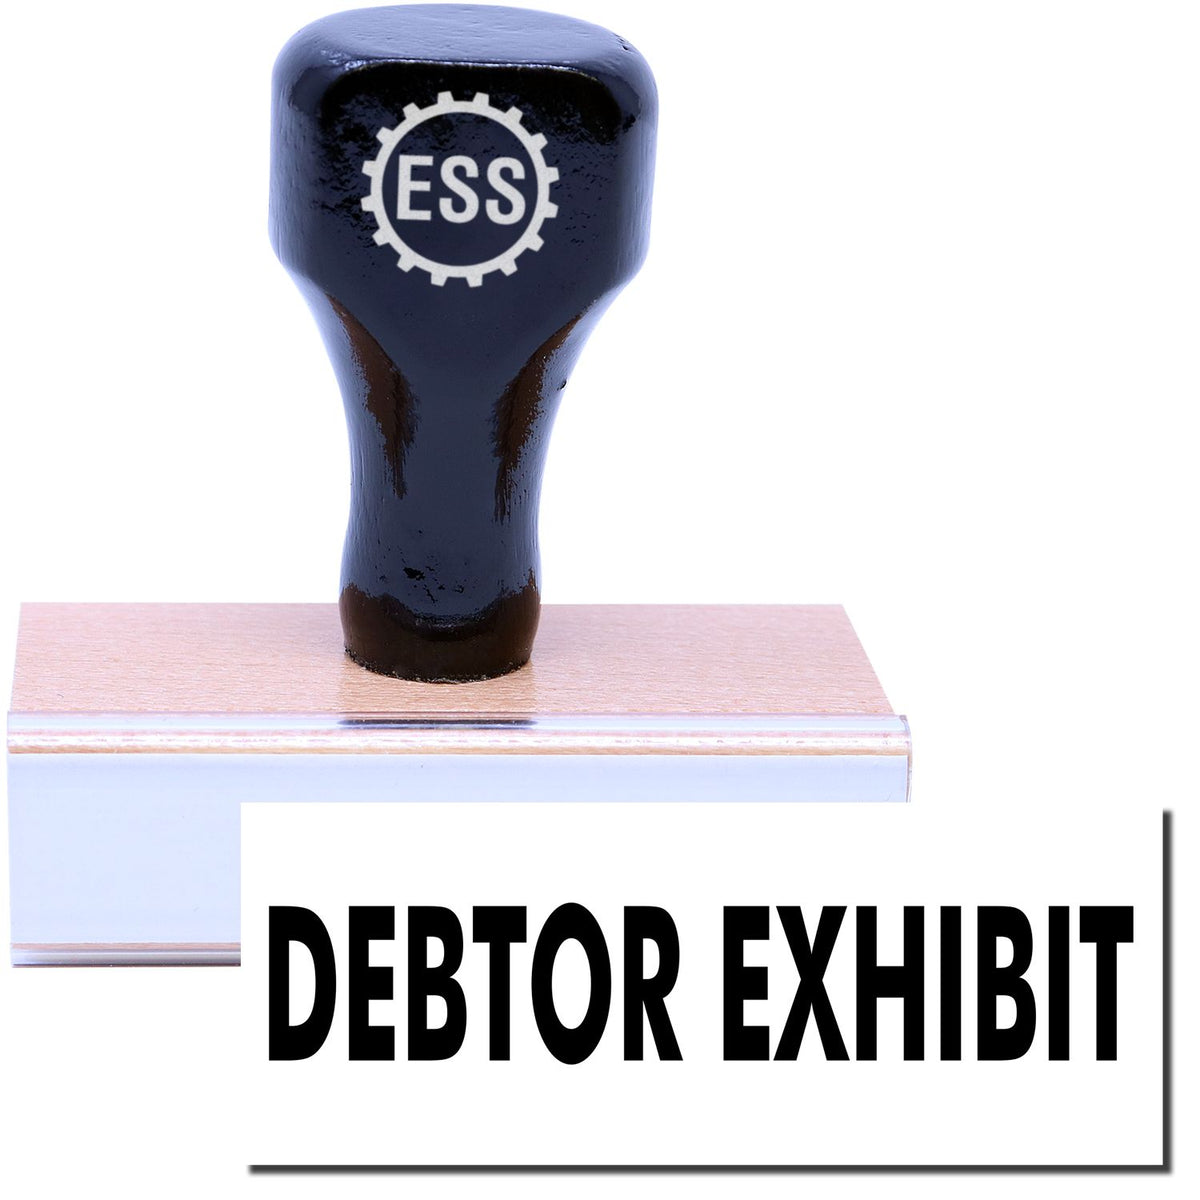 A stock office rubber stamp with a stamped image showing how the text &quot;DEBTOR EXHIBIT&quot; in a large font is displayed after stamping.